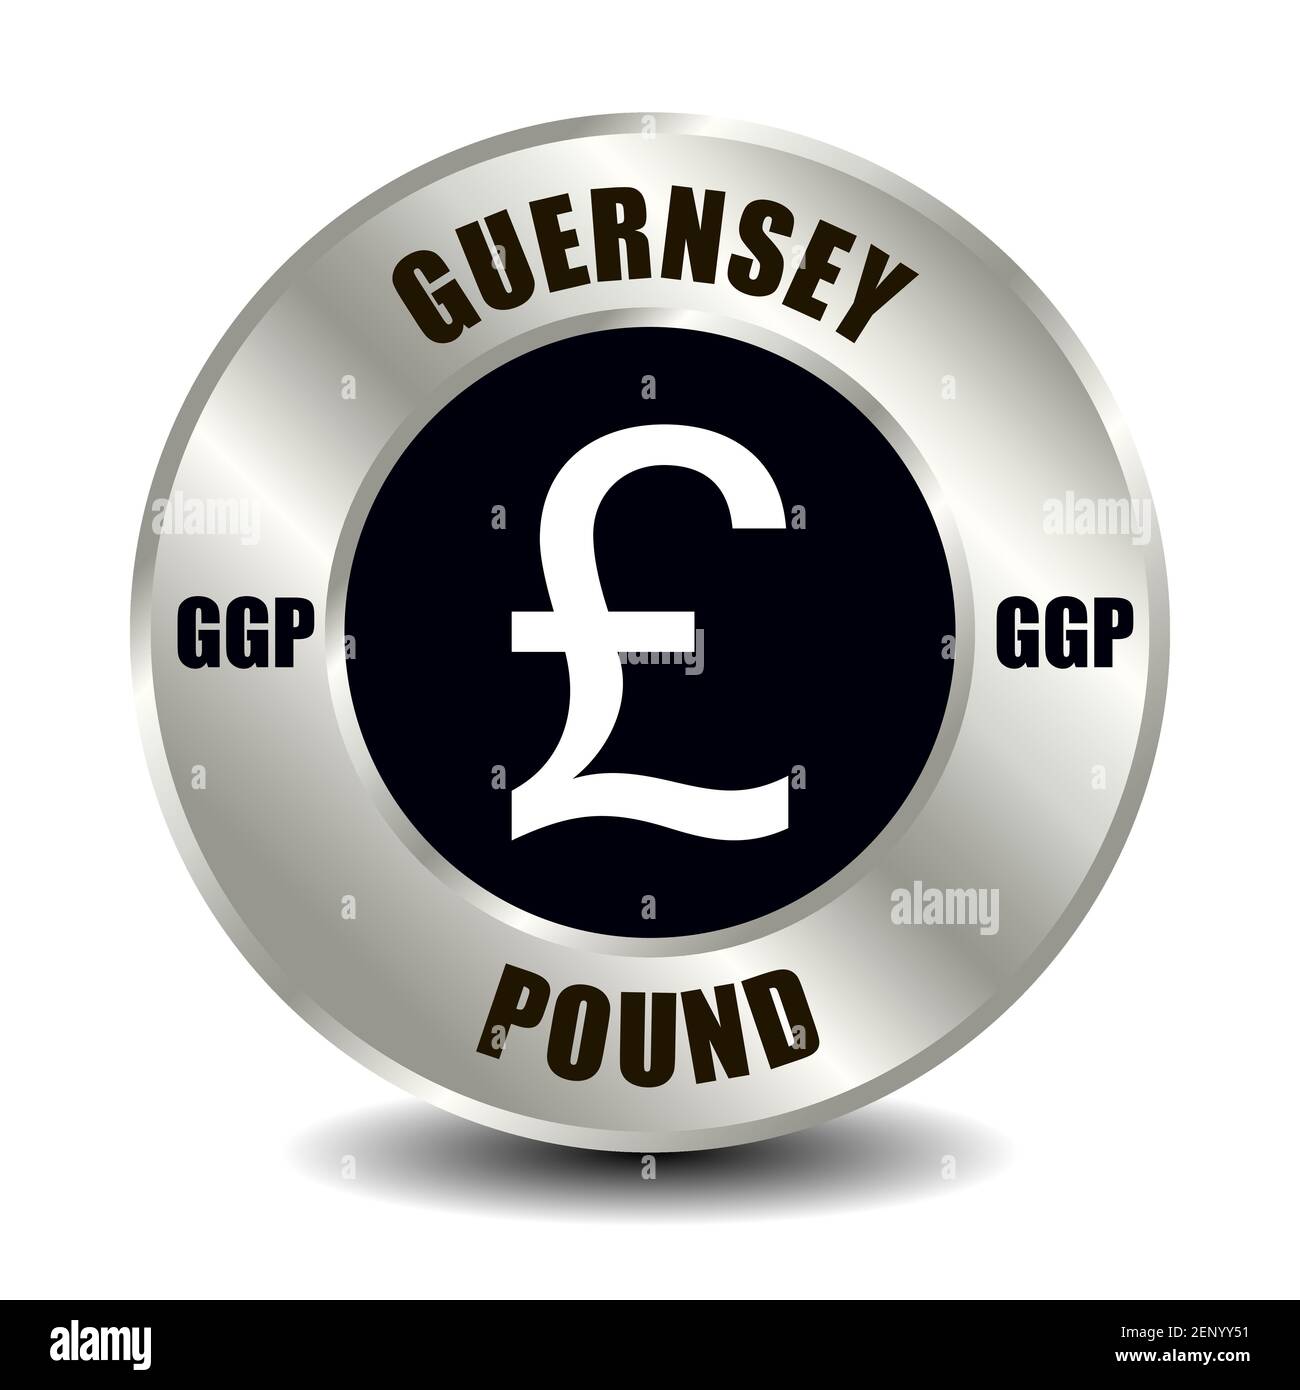 Guernsey money icon isolated on round silver coin. Vector sign of currency symbol with international ISO code and abbreviation Stock Vector